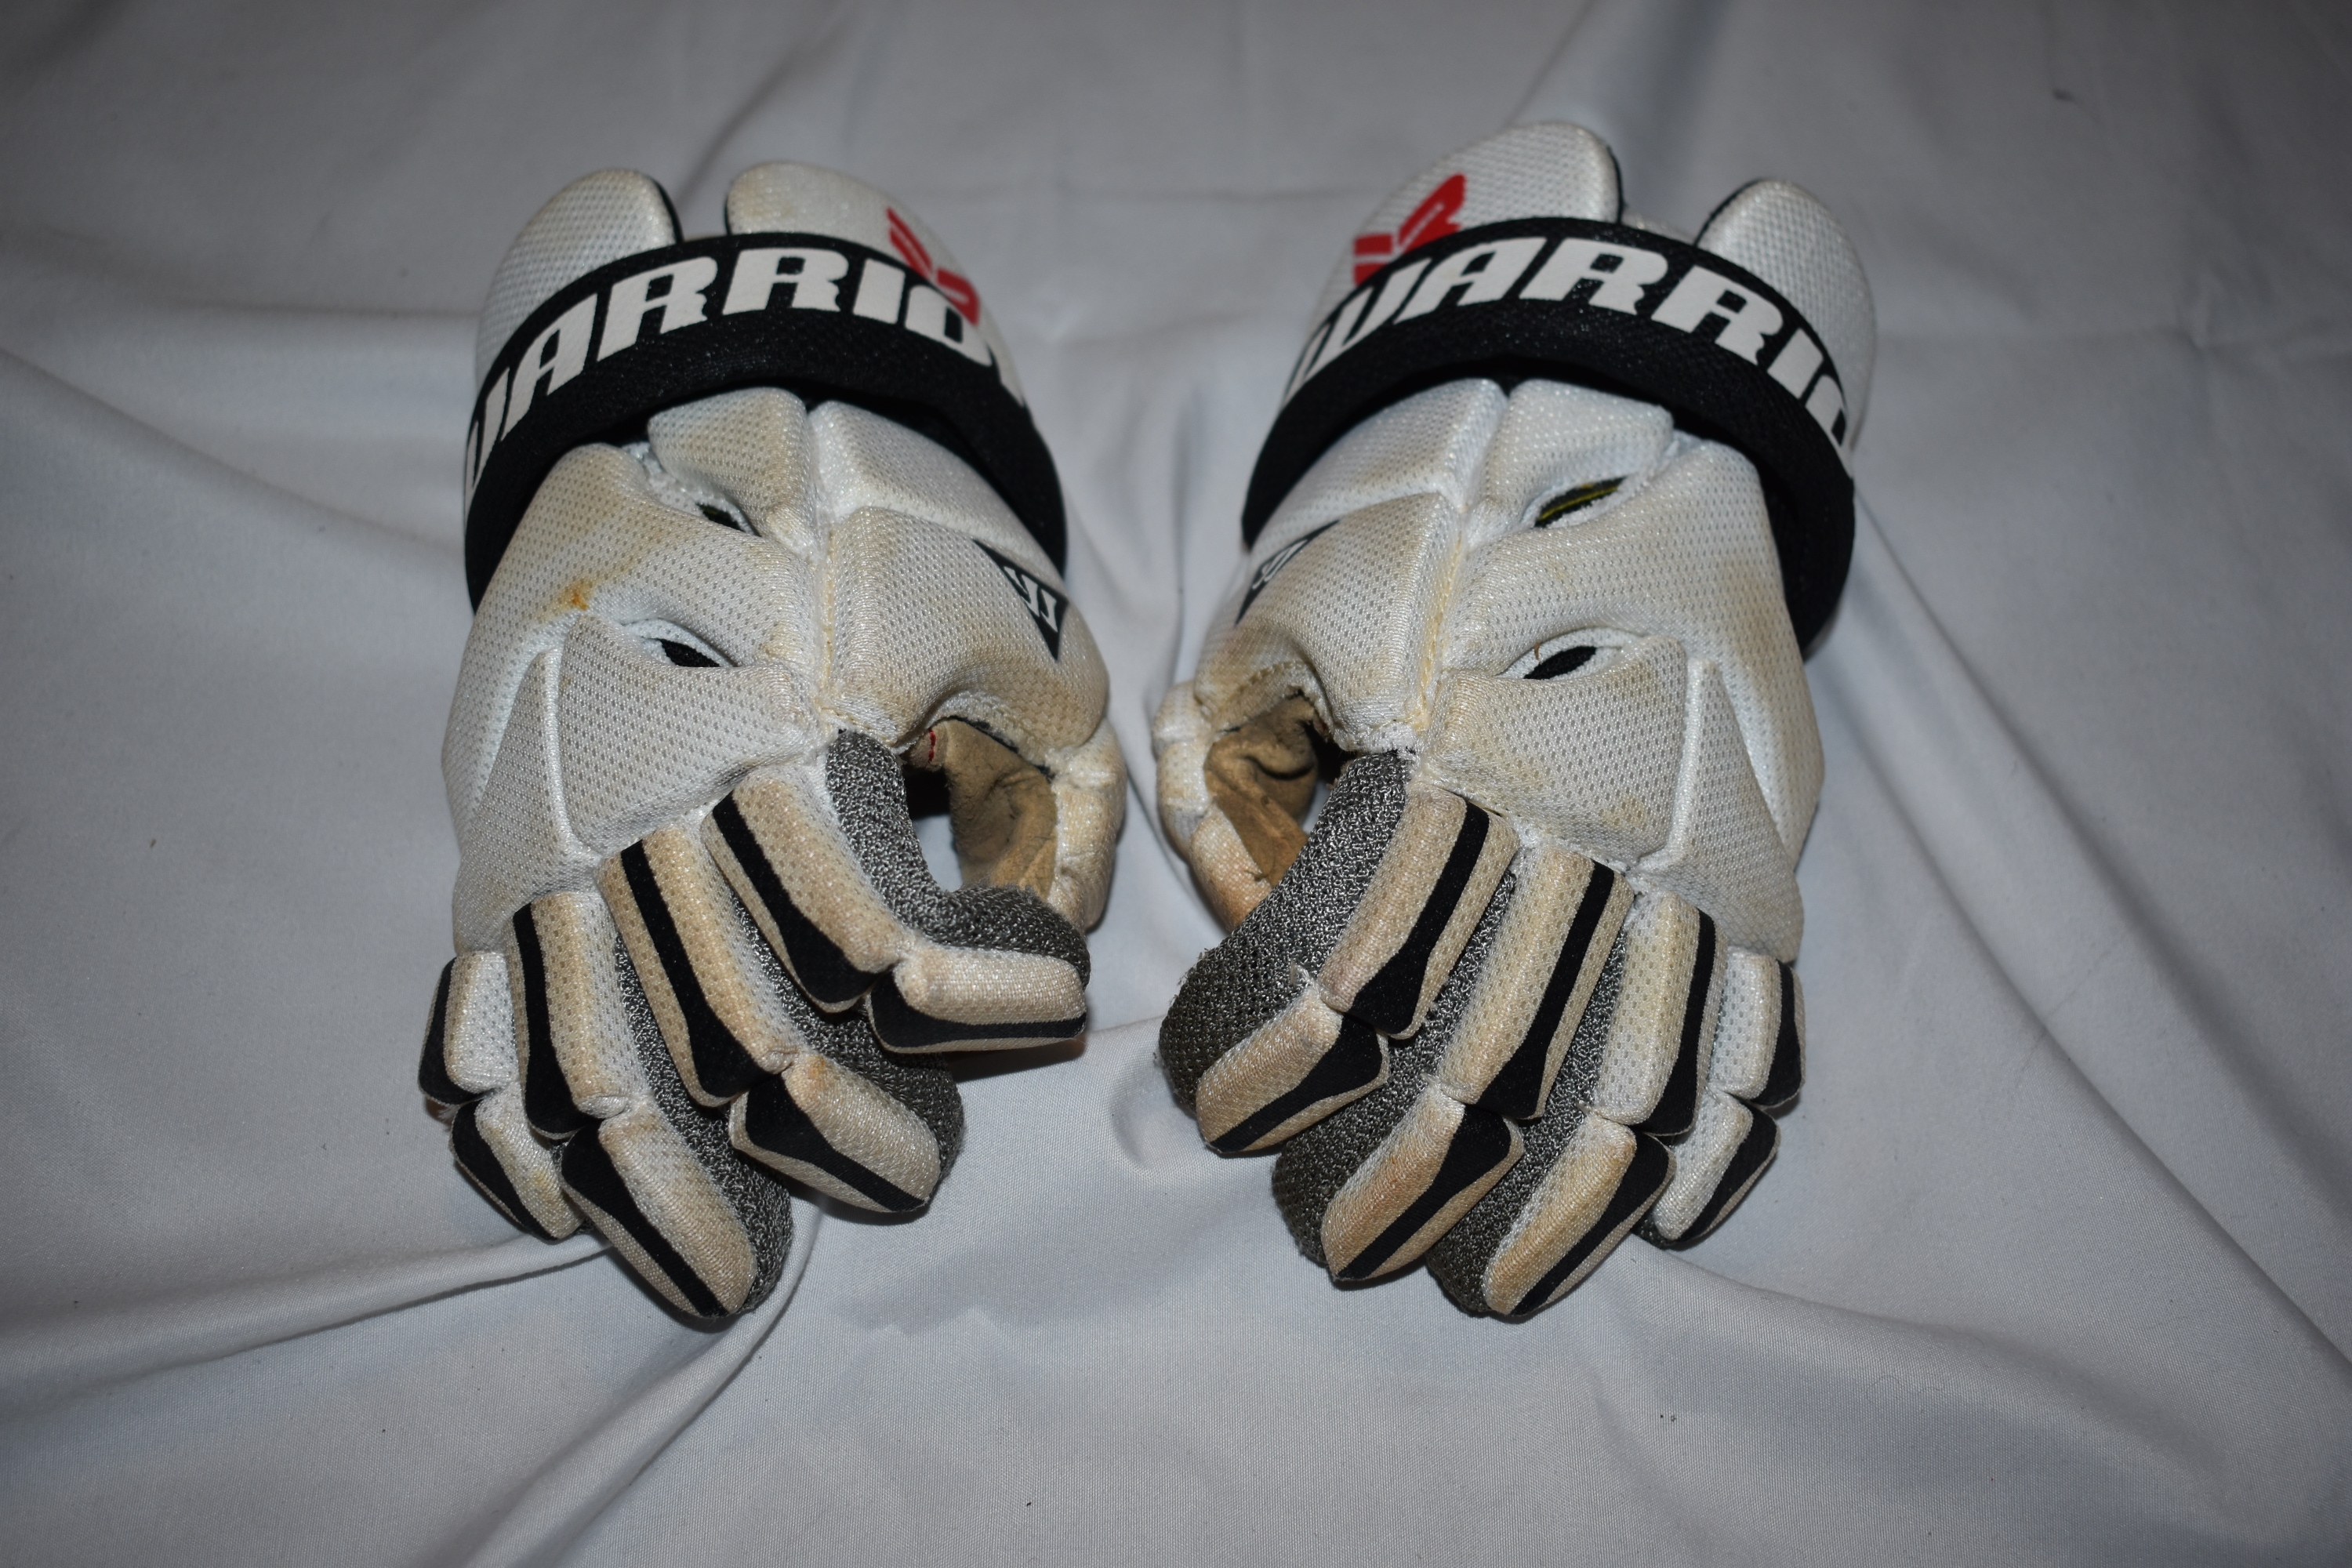 Warrior Rabil Next Lacrosse Gloves, 10 Inches